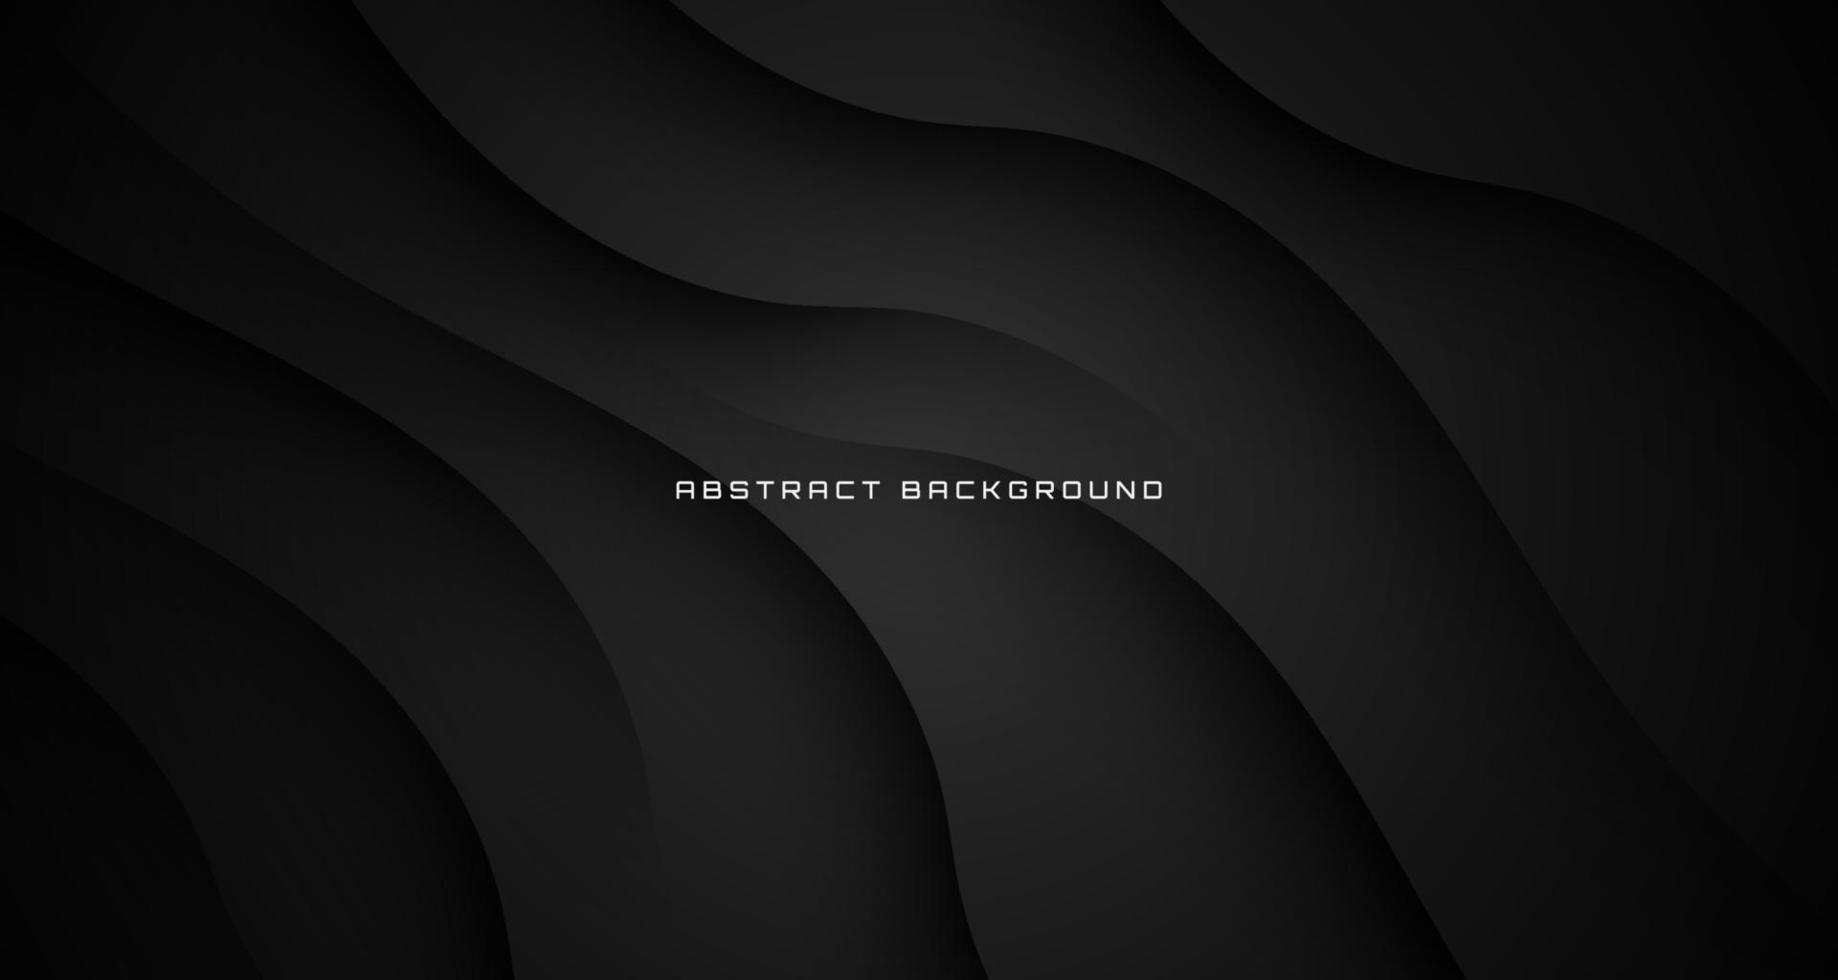 3D black geometric abstract background overlap layer on dark space with waves effect decoration. Graphic design element cutout style concept for banner, flyer, card, brochure cover, or landing page vector